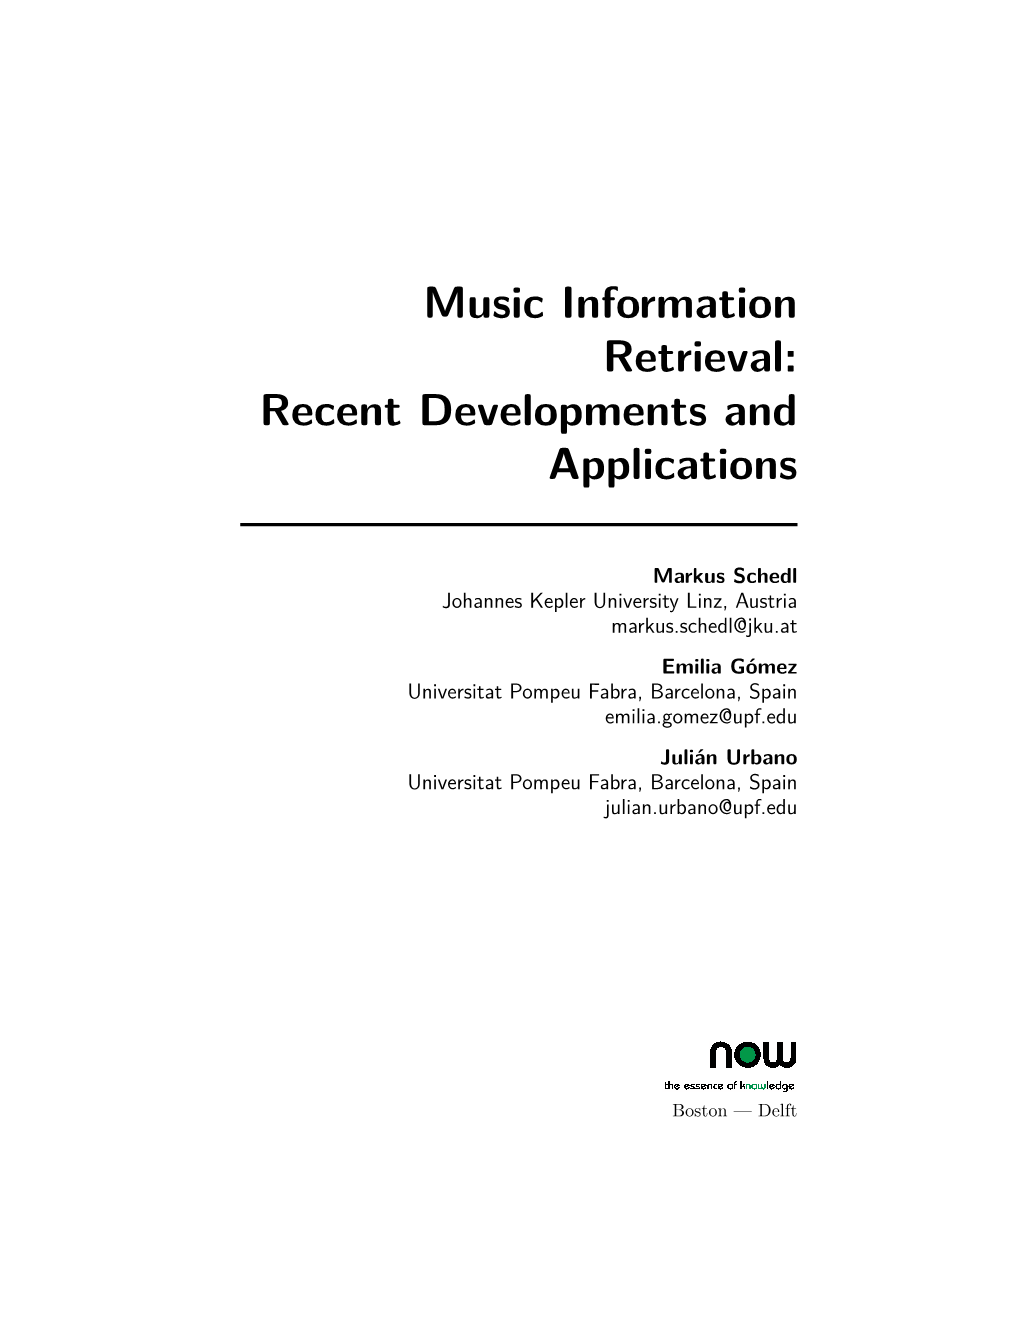 Music Information Retrieval: Recent Developments and Applications